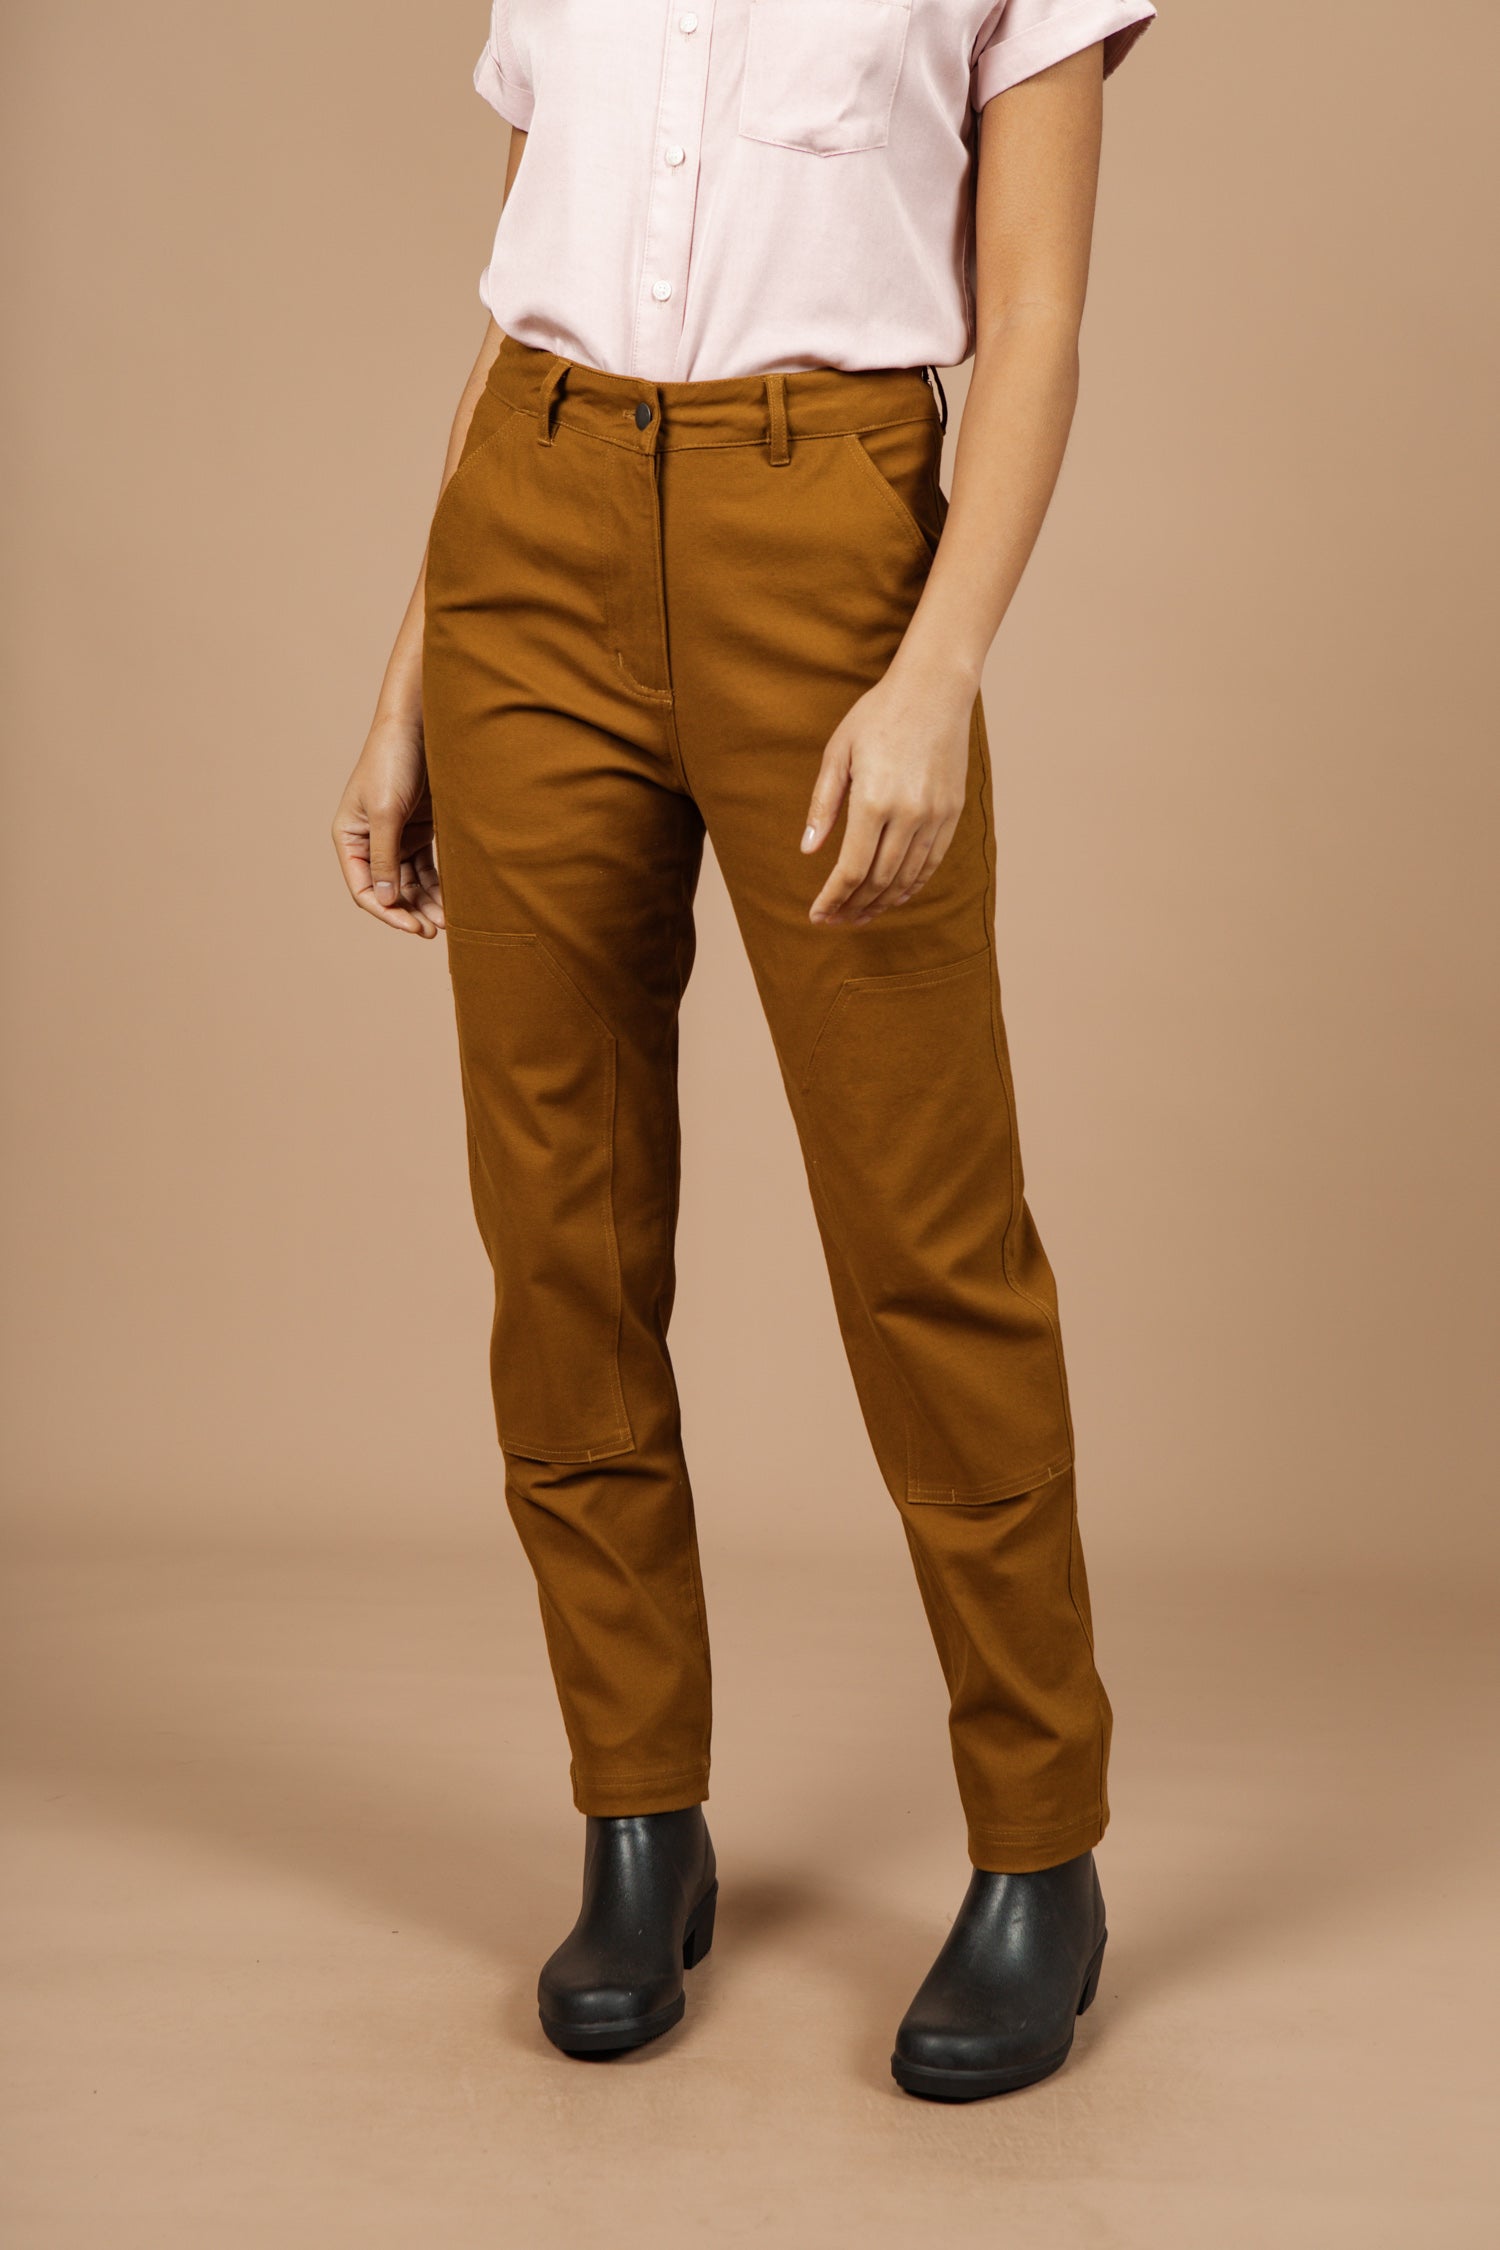 Bowden Utility Pant / Hickory Canvas